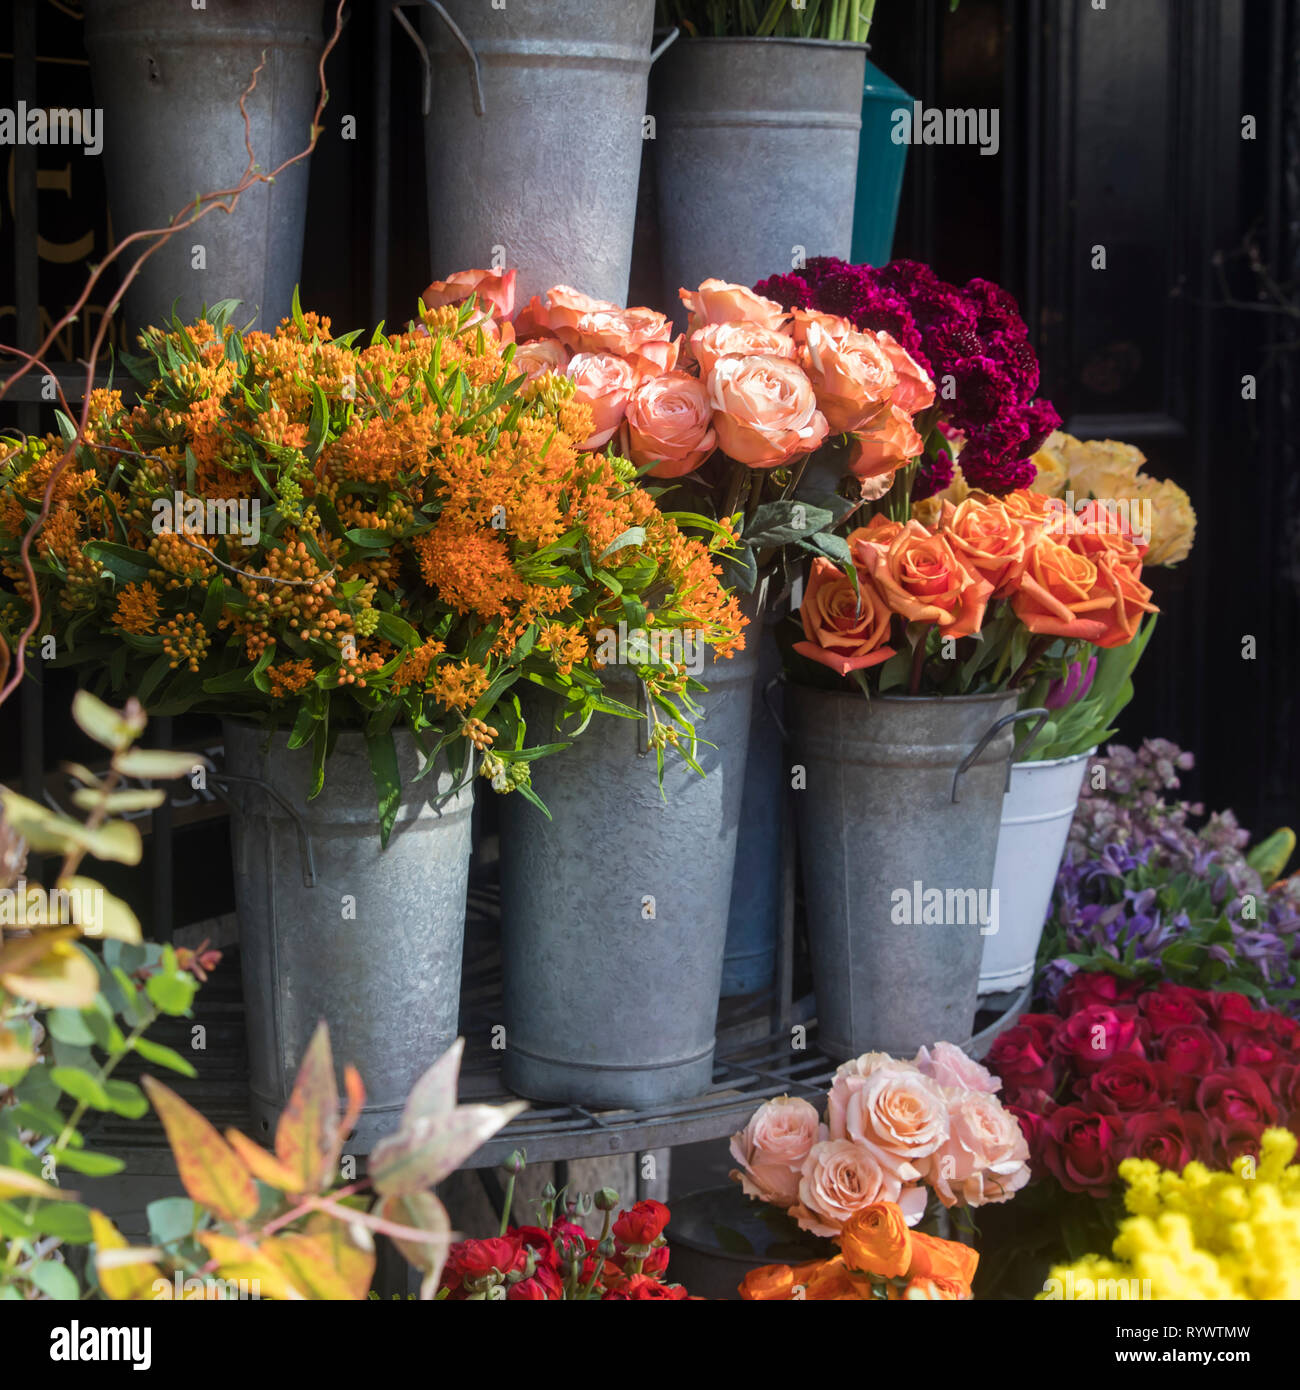 Many different spring flowers in baskets for bouquets on sale in the market Stock Photo